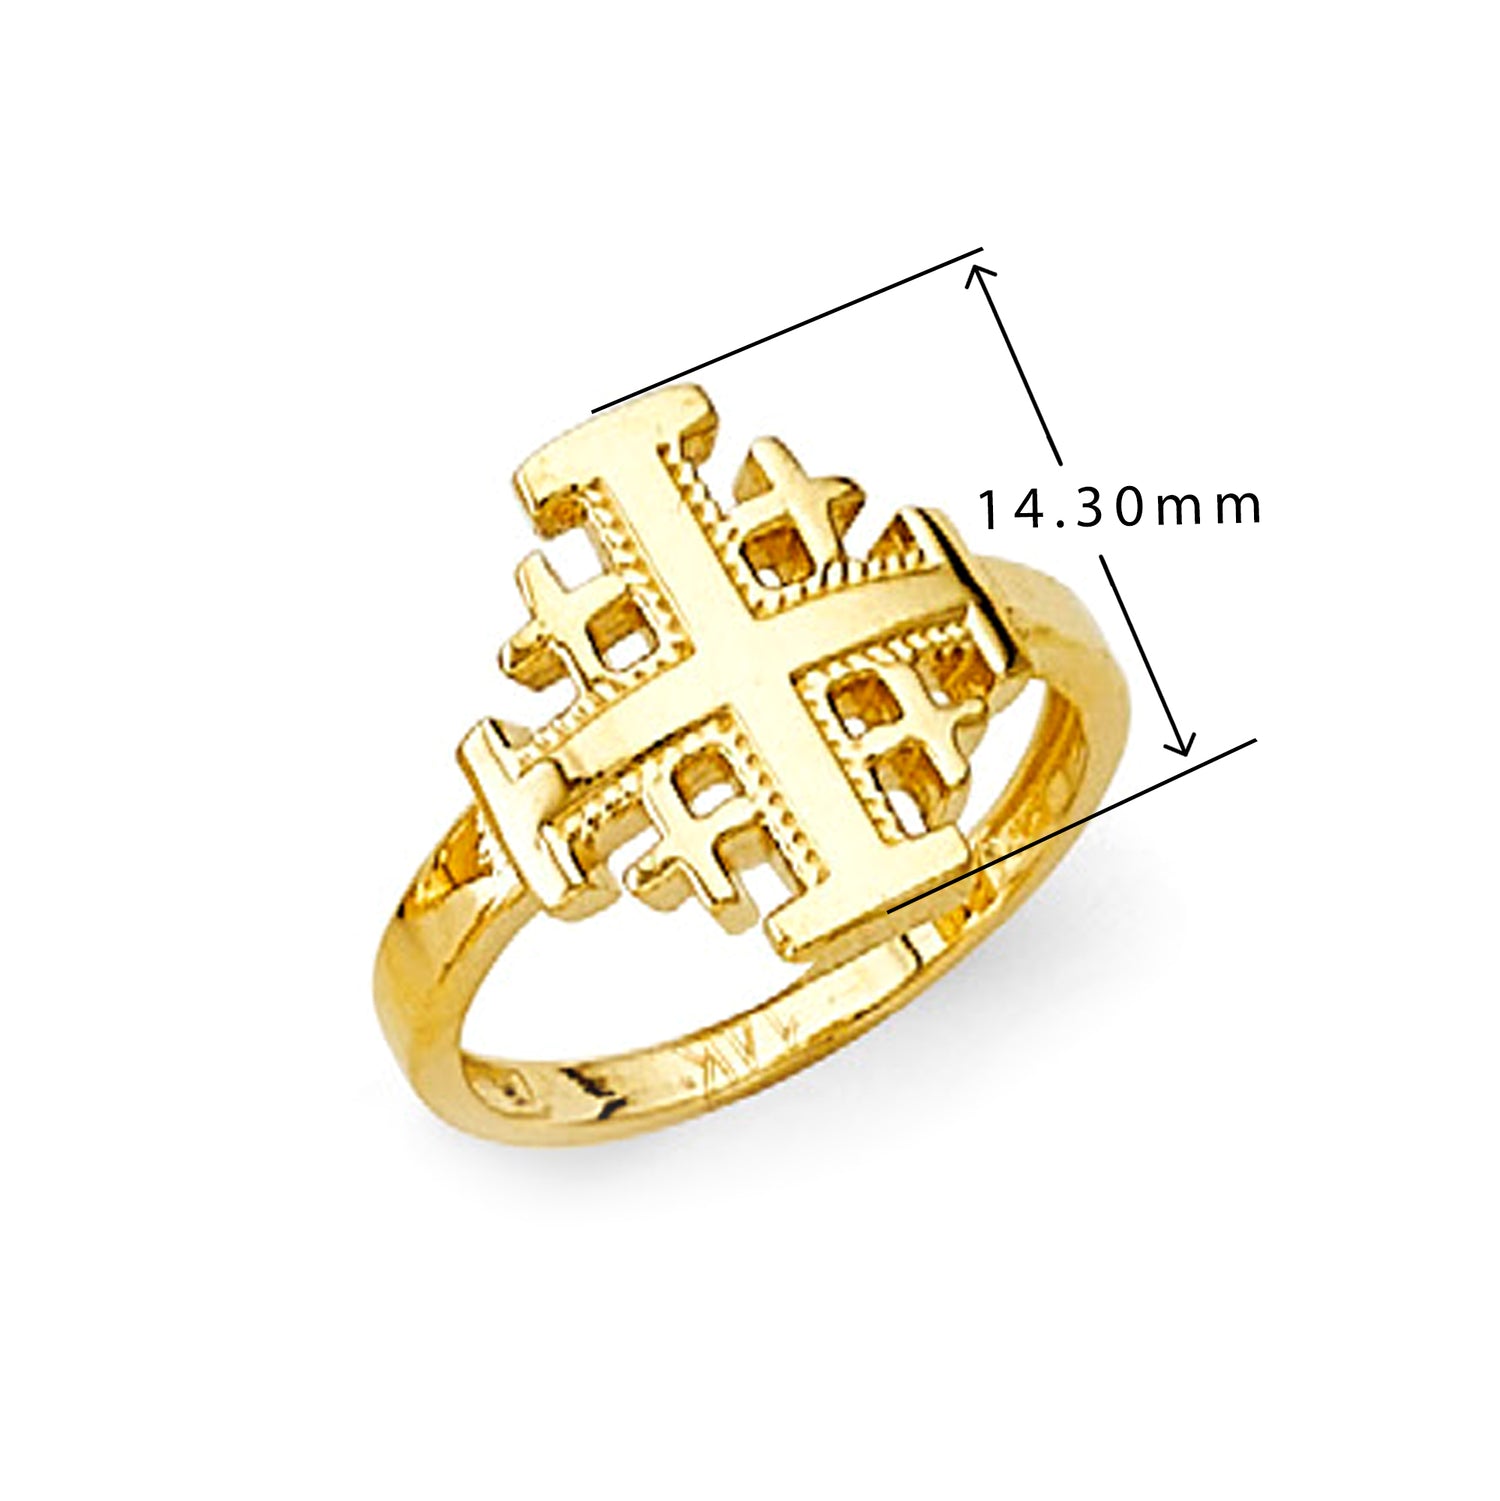 Pristine Jerusalem Cross Ring in Solid Gold with Measurement